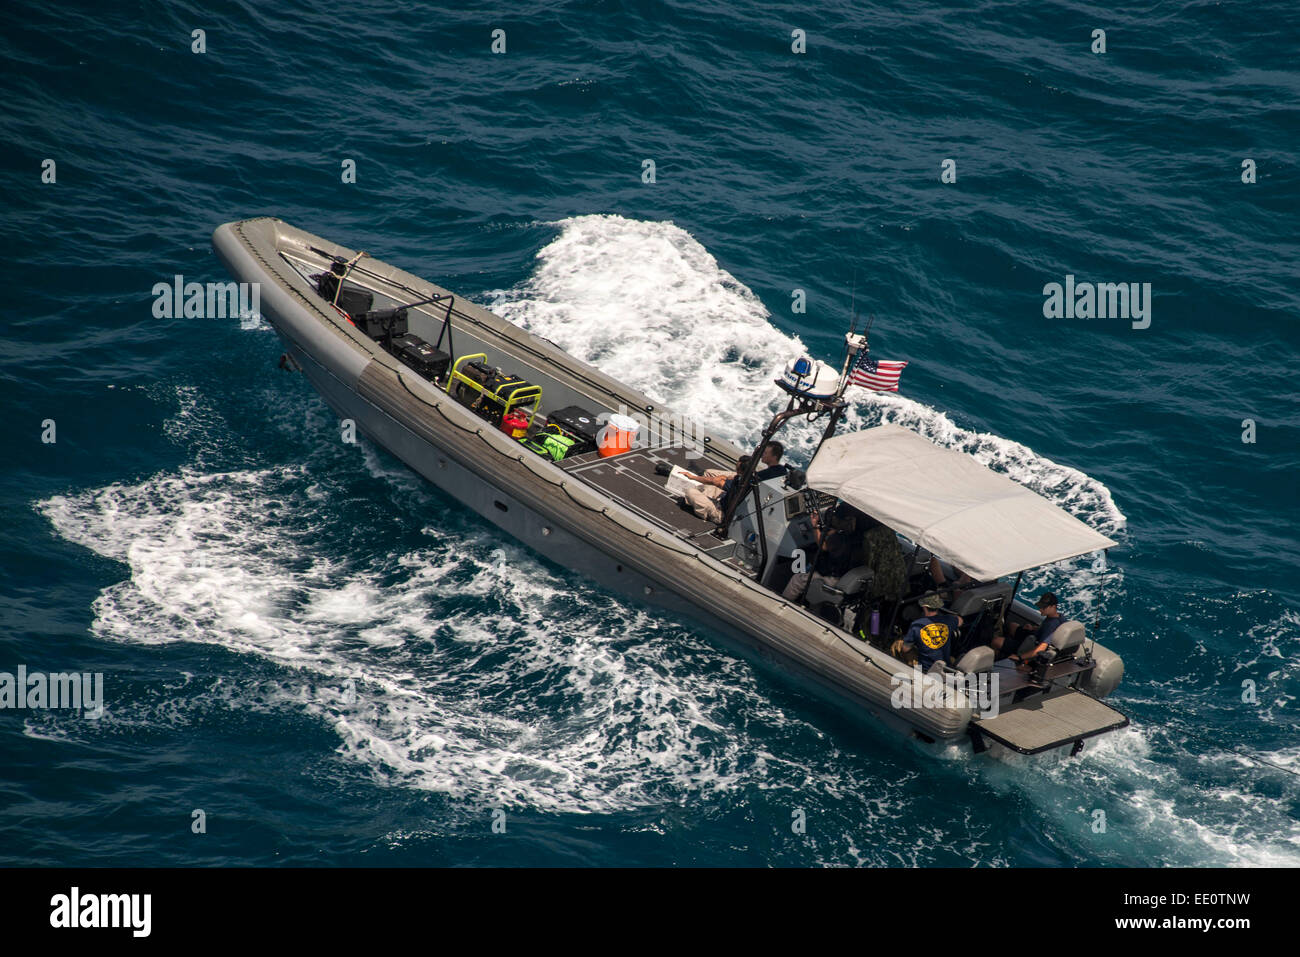 US Navy divers from Mobile Diving and Salvage Unit operate a Tow Fish side scan sonar system off a rigid hull inflatable boat during search efforts to locate AirAsia Flight 8501 black box along with ships from other nations January 12, 2015 in the Java Sea. Stock Photo